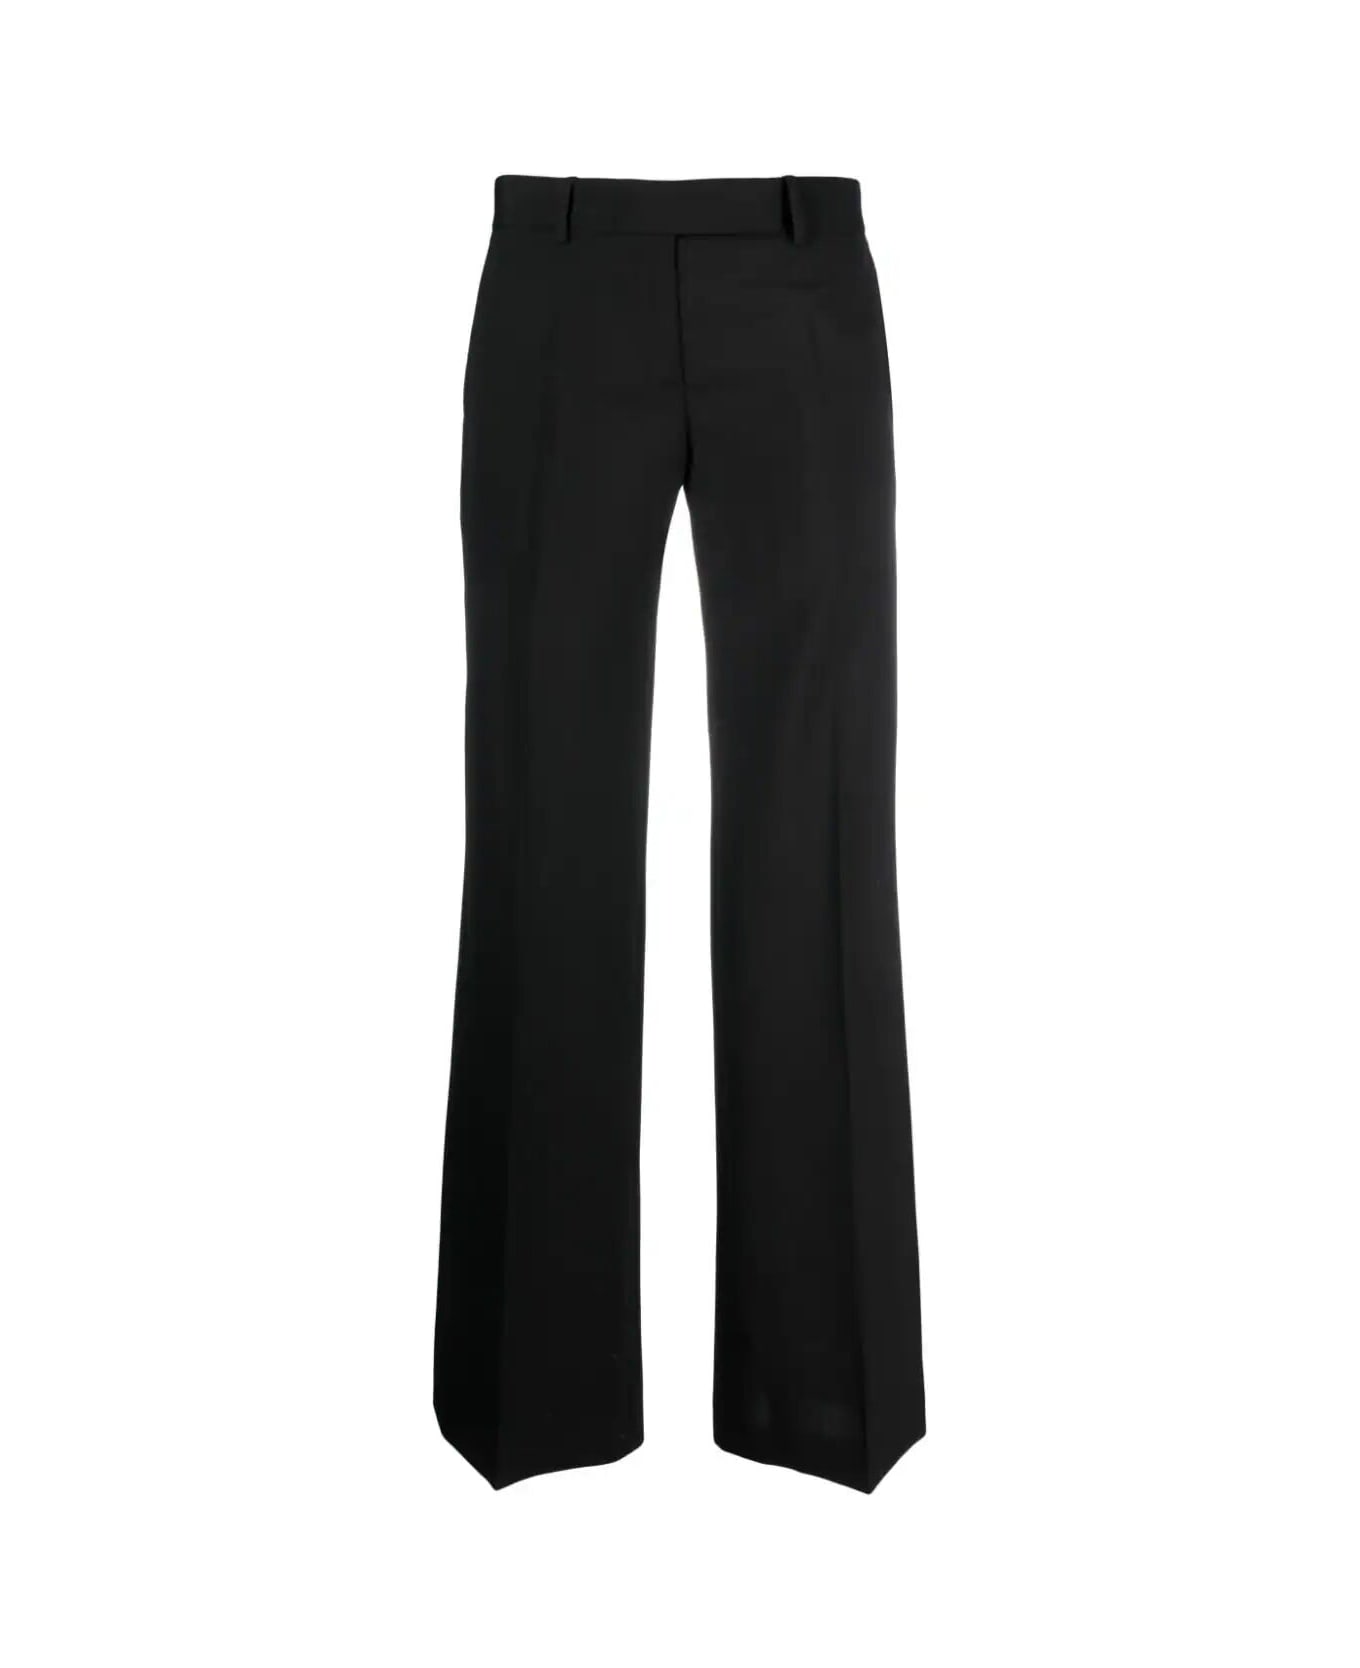 Quira Low Waist Trousers - Black ボトムス